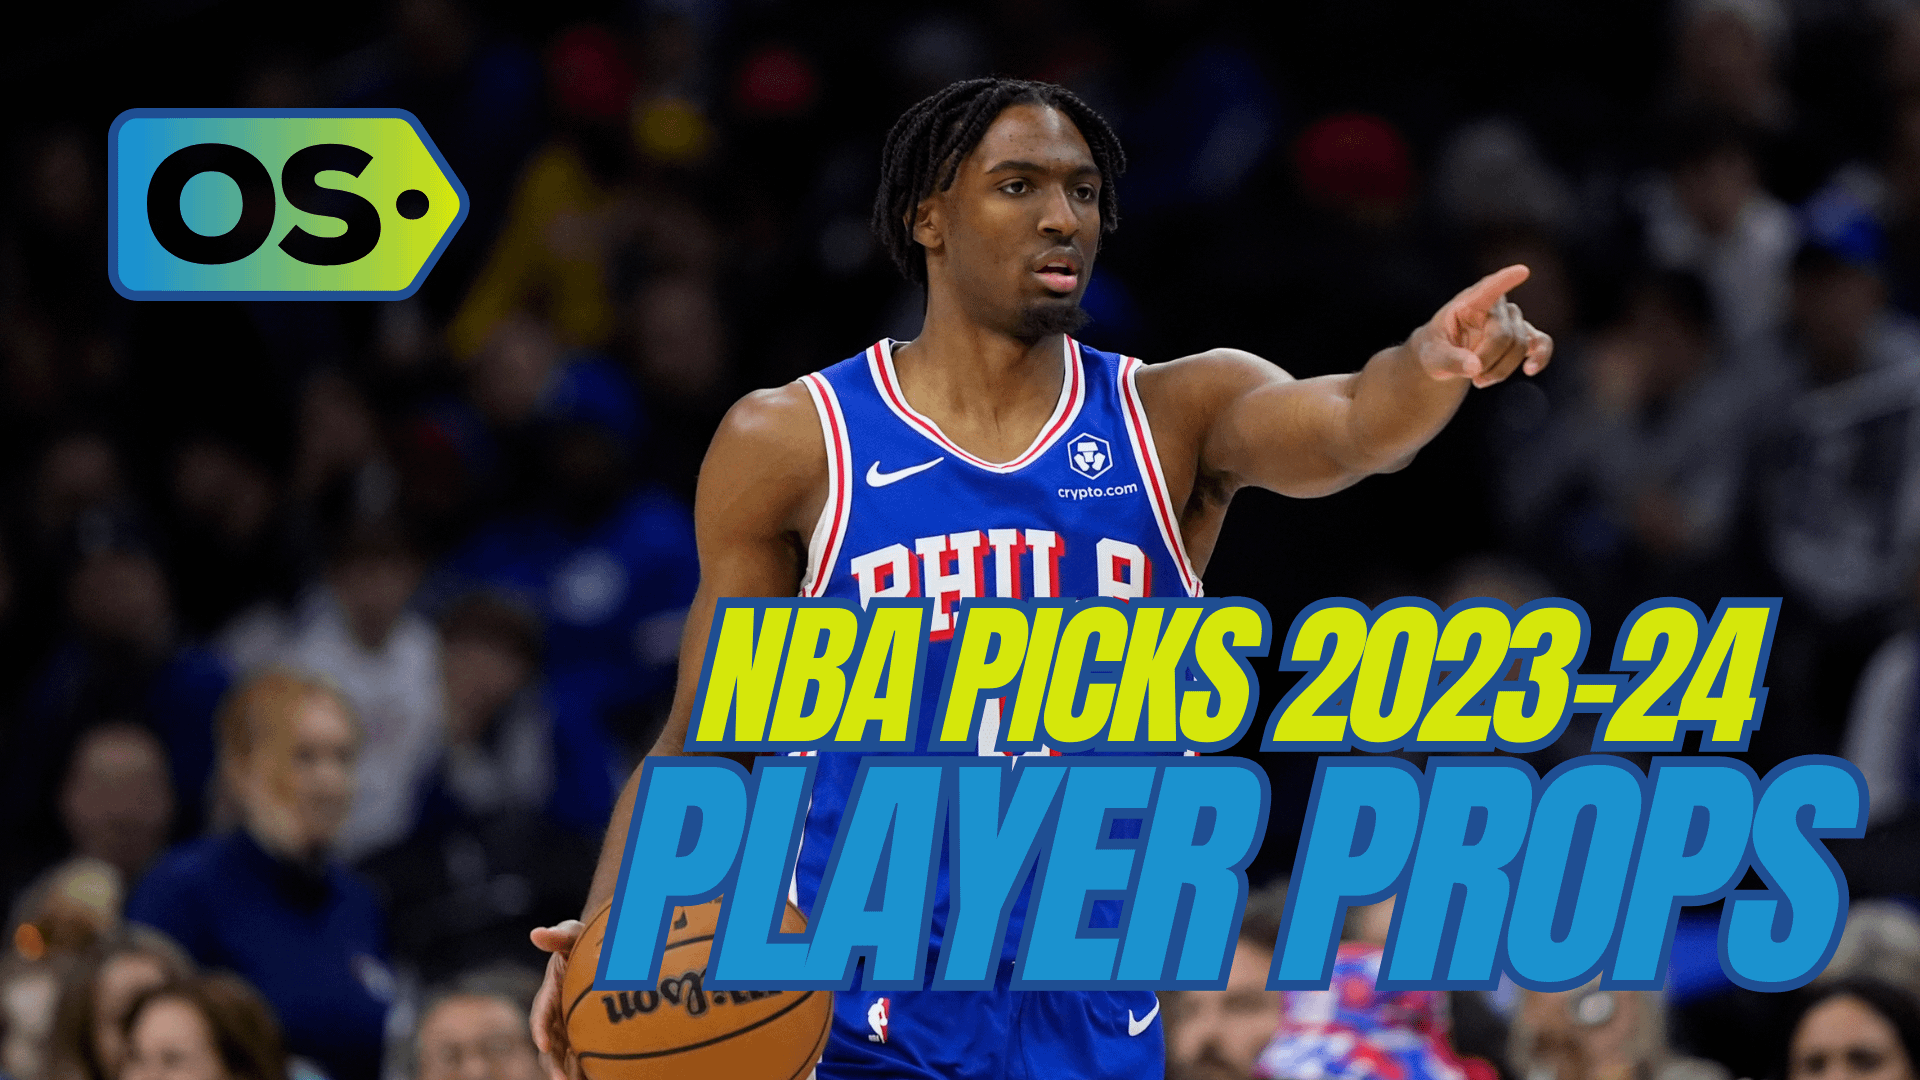 The best NBA player prop bets and picks today for Thursday, February 22, include wagers on Myles Turner and Tyrese Maxey.